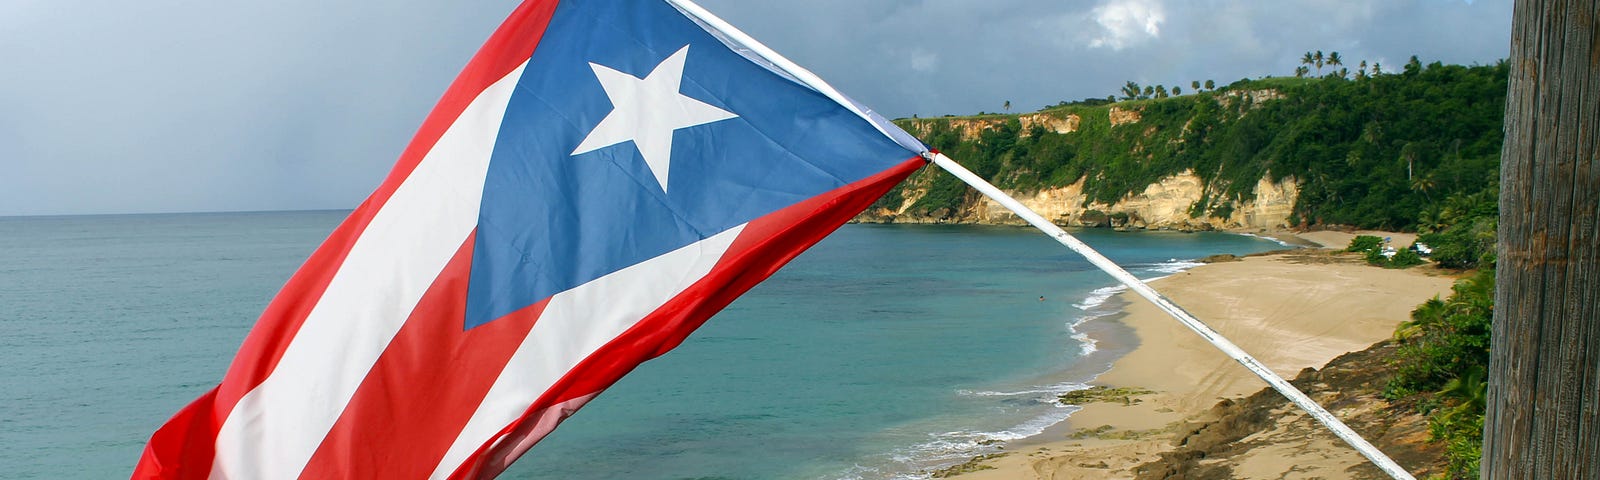 The Puerto Rican flag is flying over a beach.